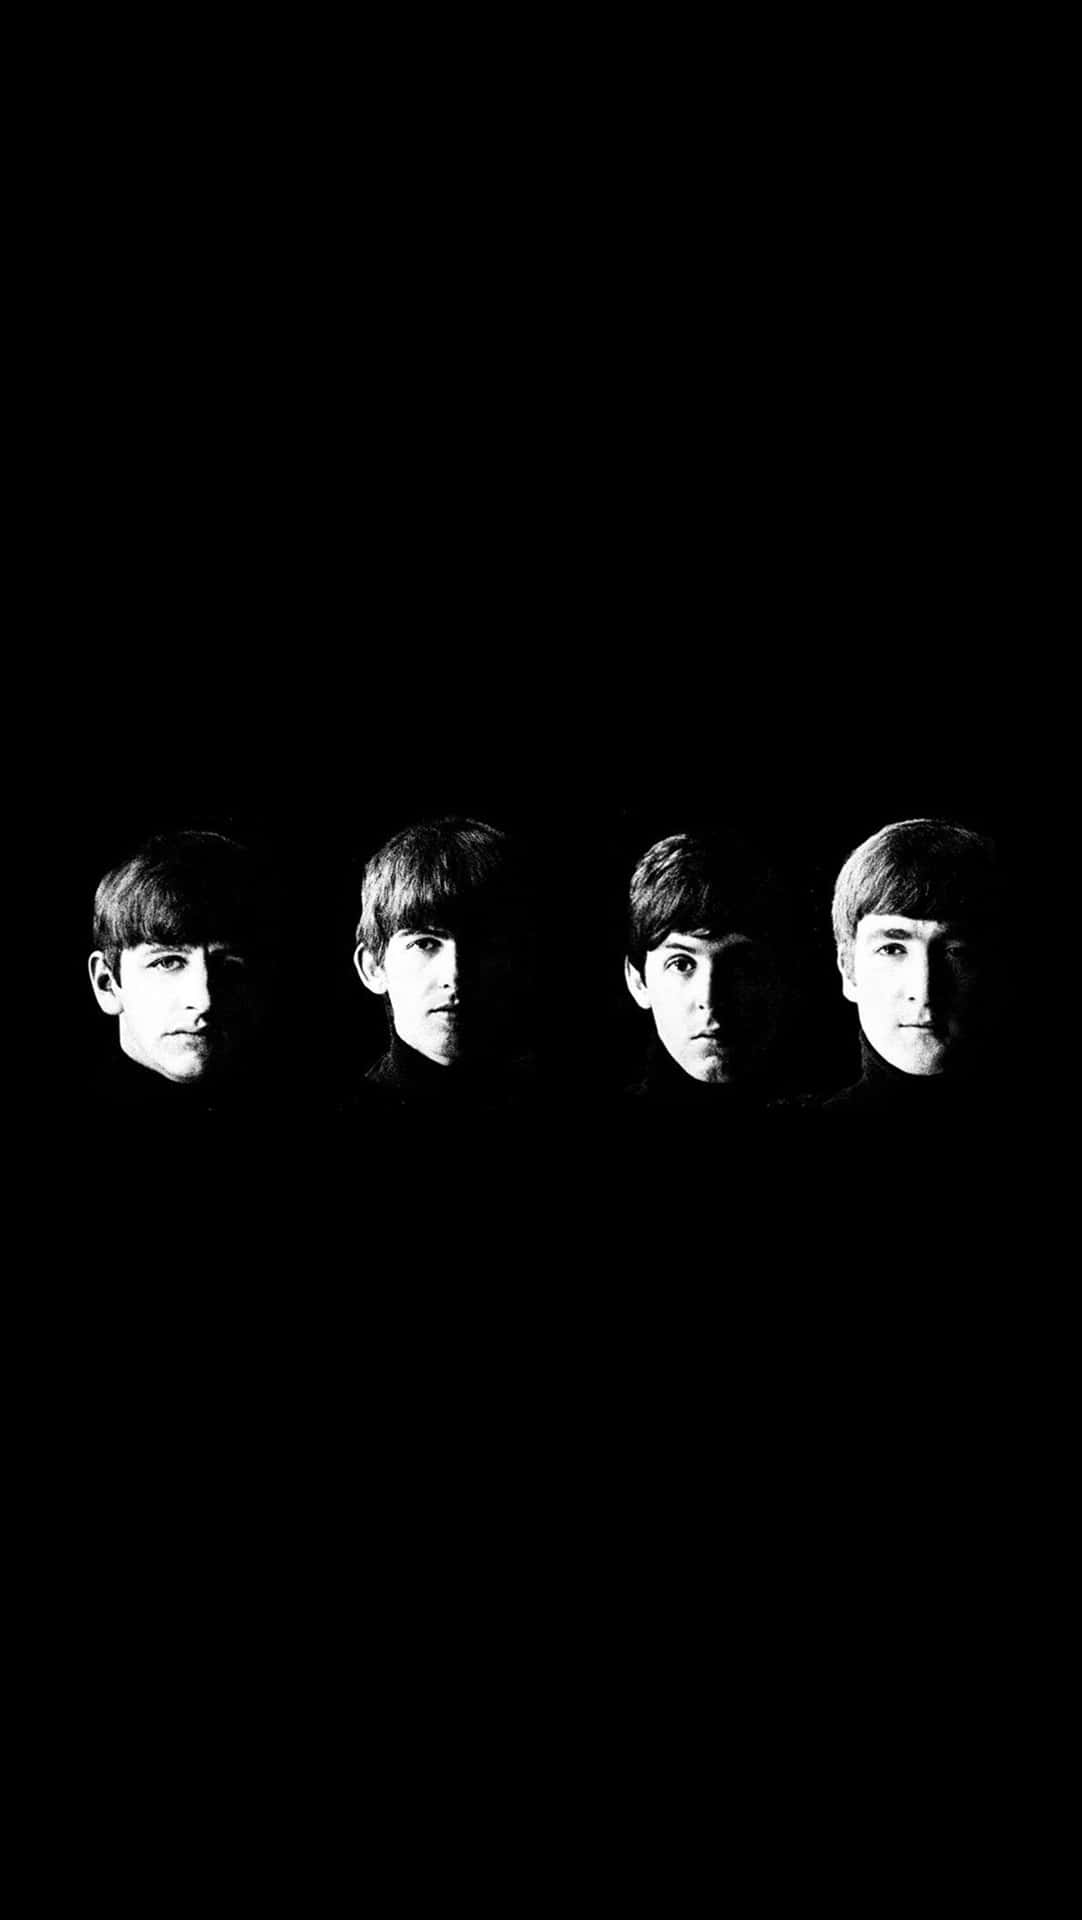 The Beatles - icons of modern music"